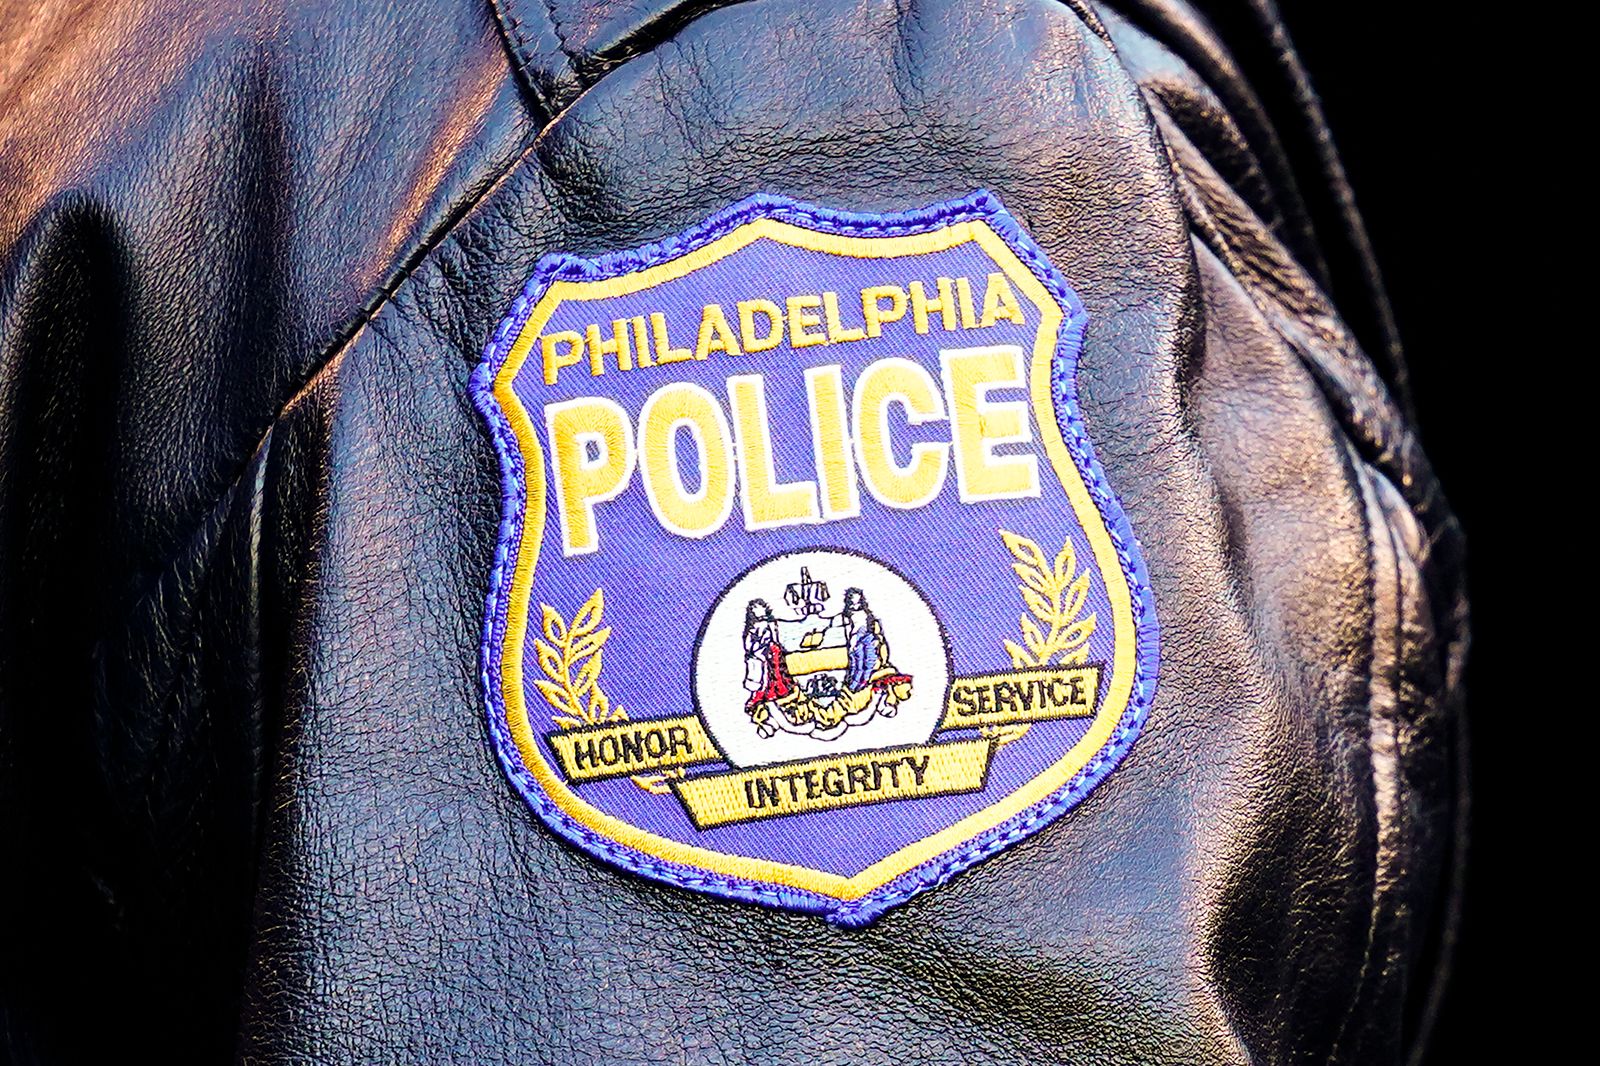 Philly police seek recruits to help combat gun violence - WHYY